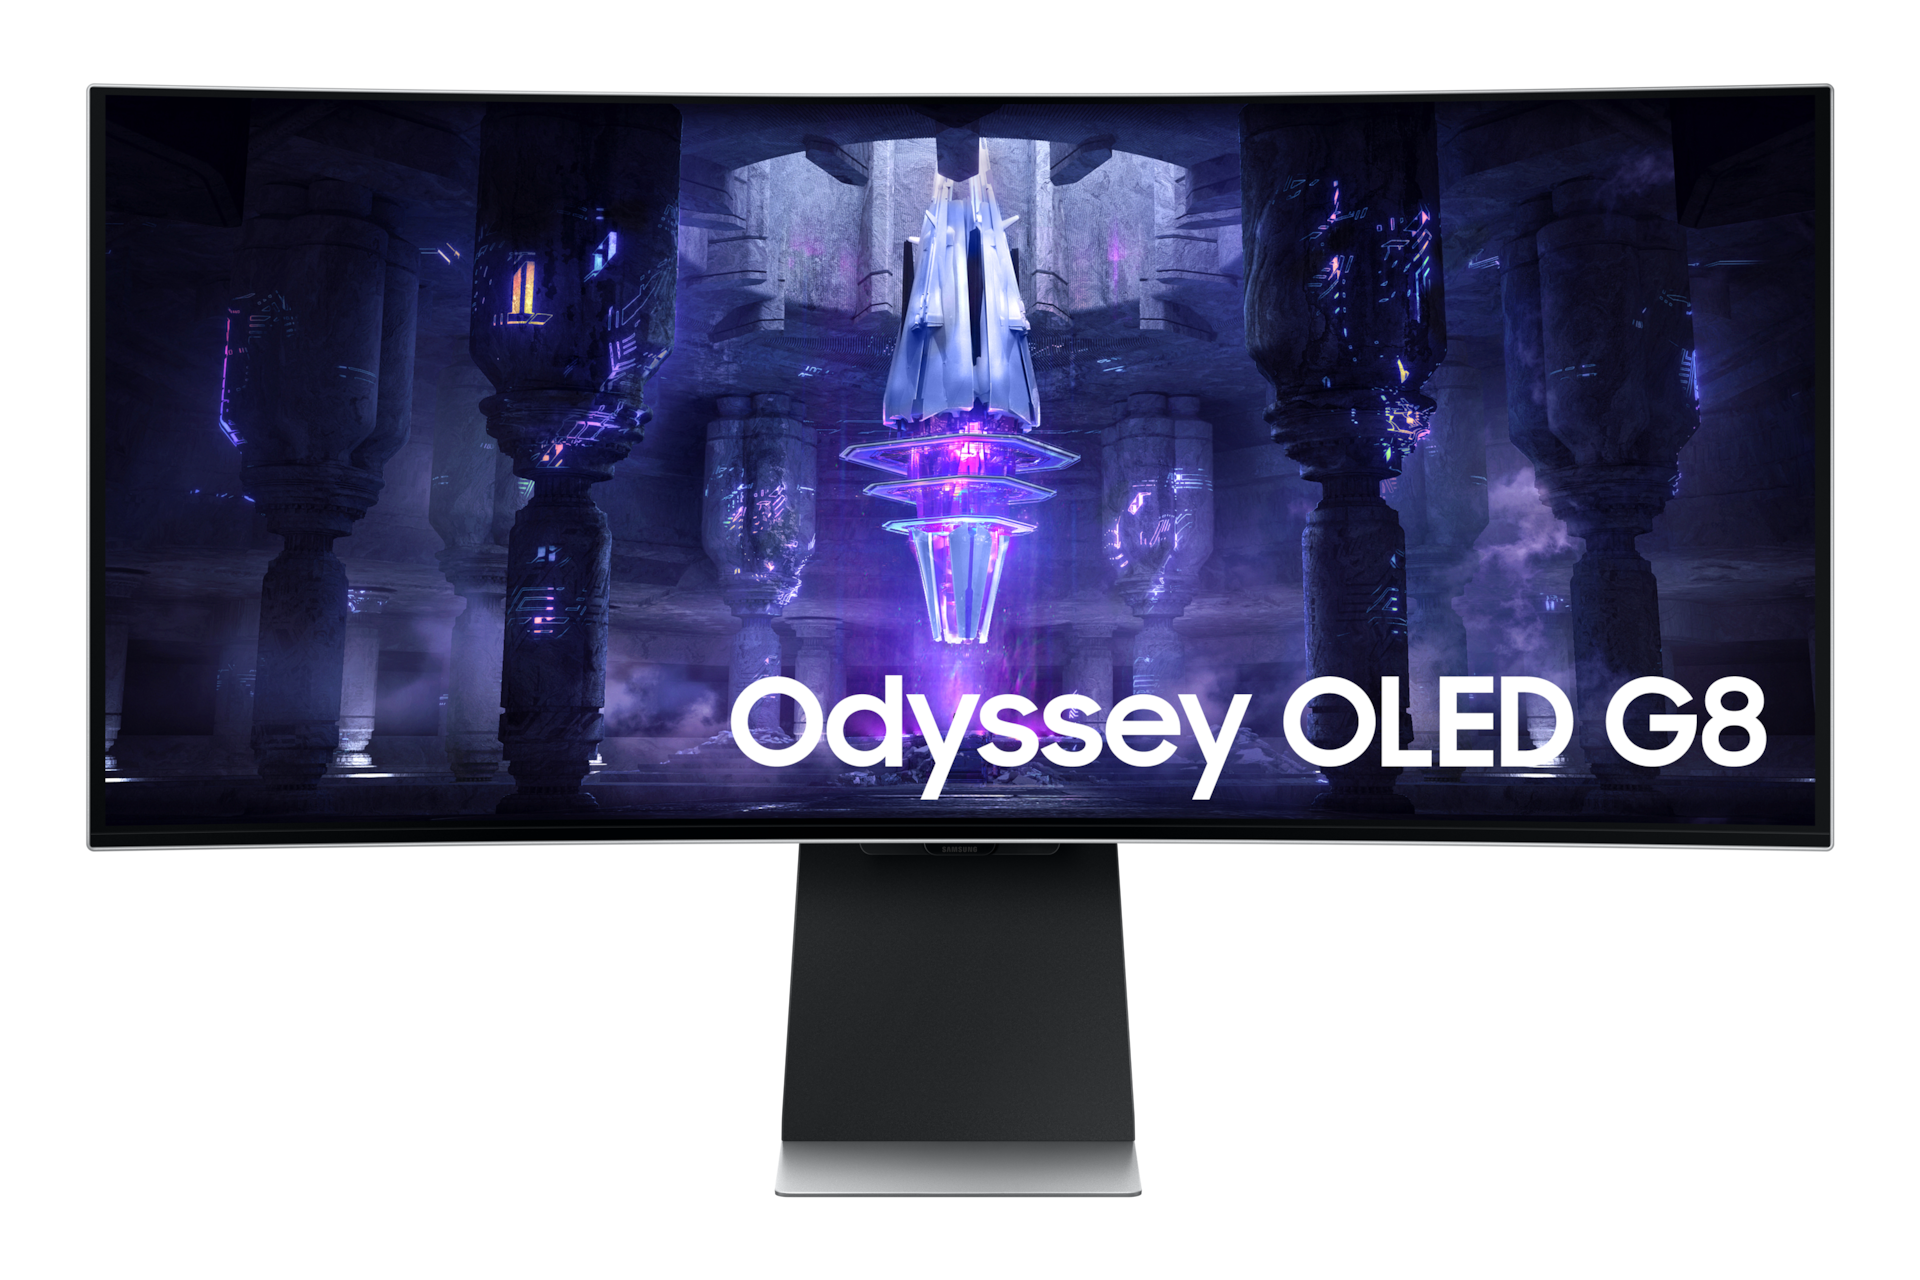 Right perspective view of the Samsung 34 inch Odyssey OLED G8 Ultra WQHD Curved Gaming Monitor.